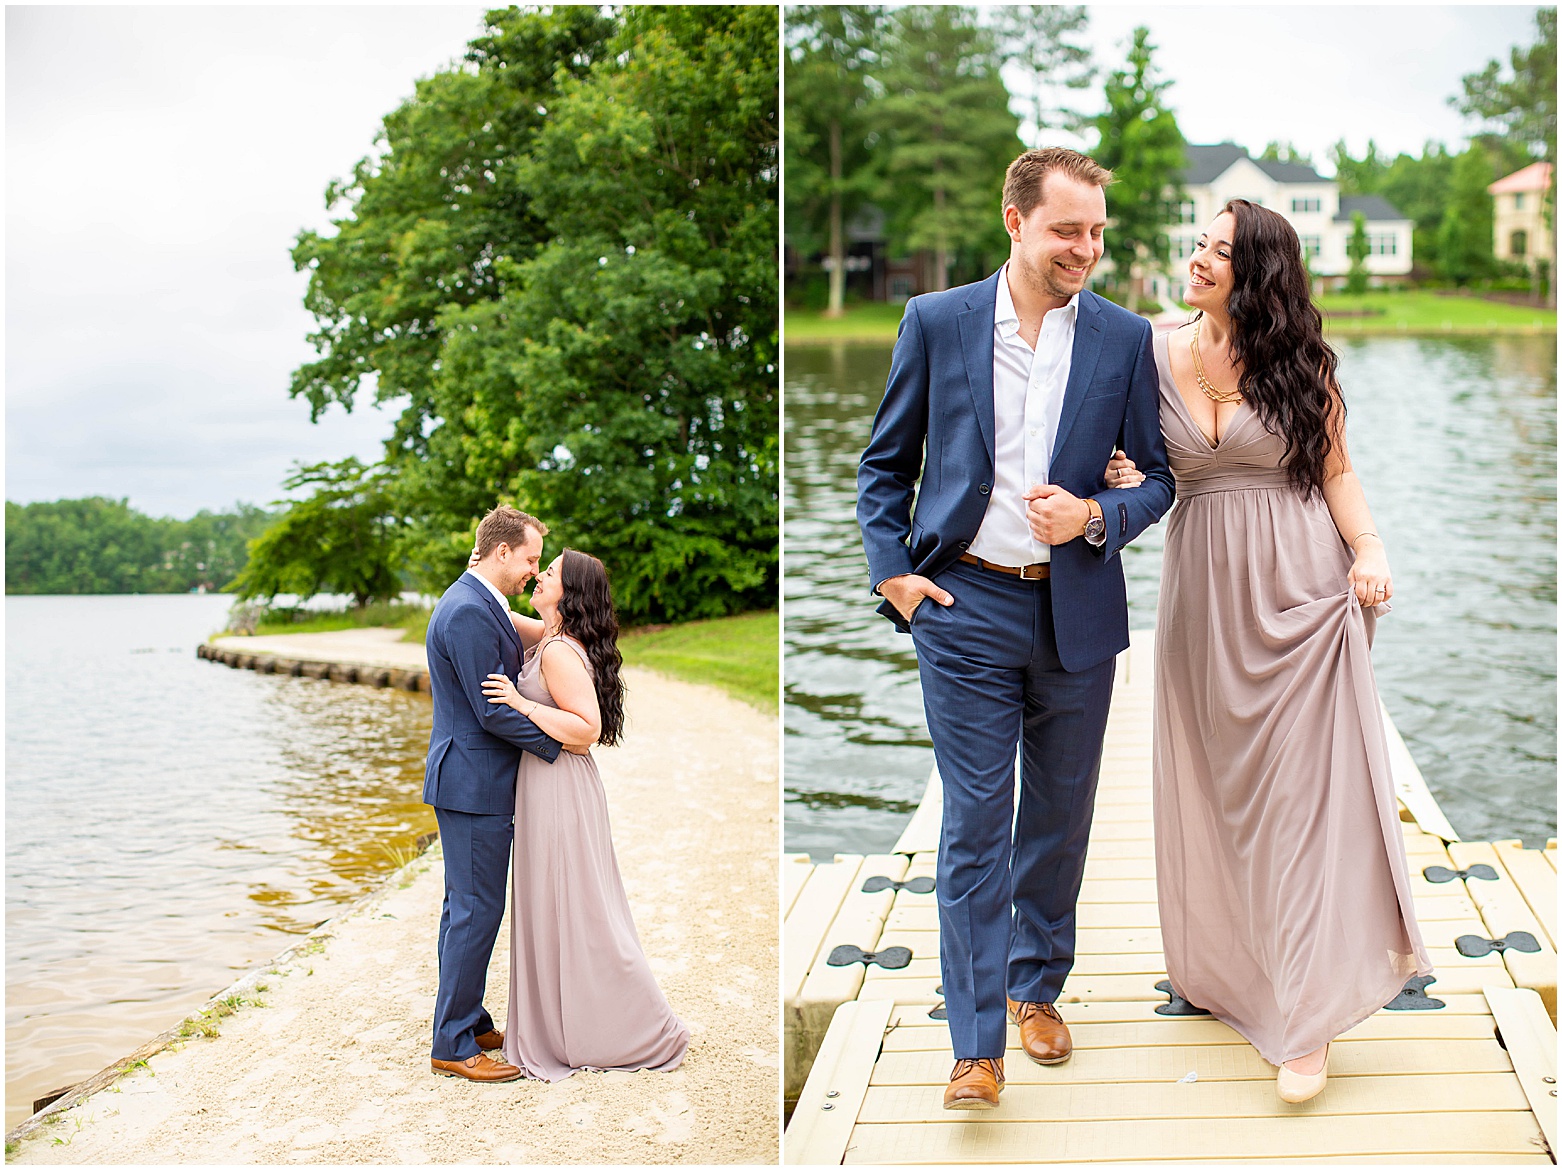 View More: http://hopetaylorphotographyphotos.pass.us/aubree-and-nick-engagement